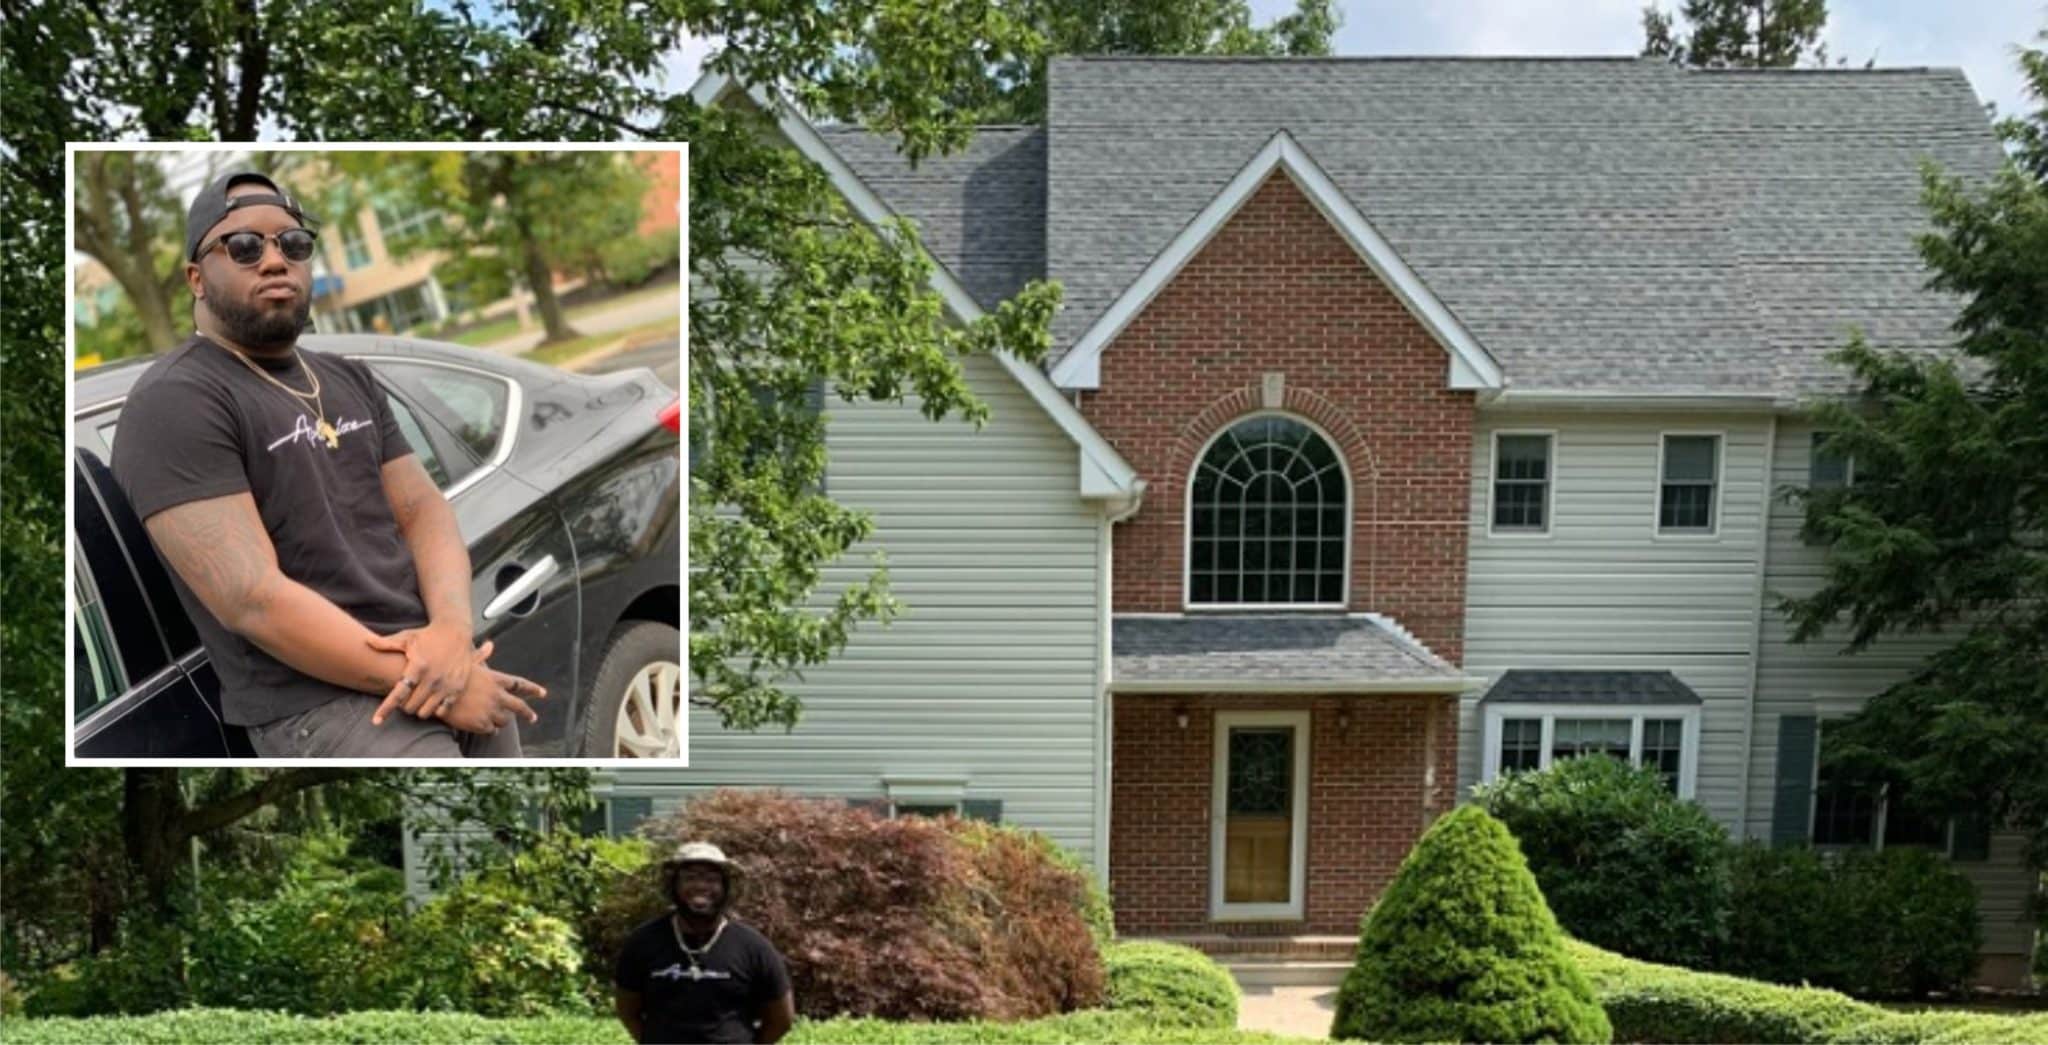 Man builds mansion after being homeless